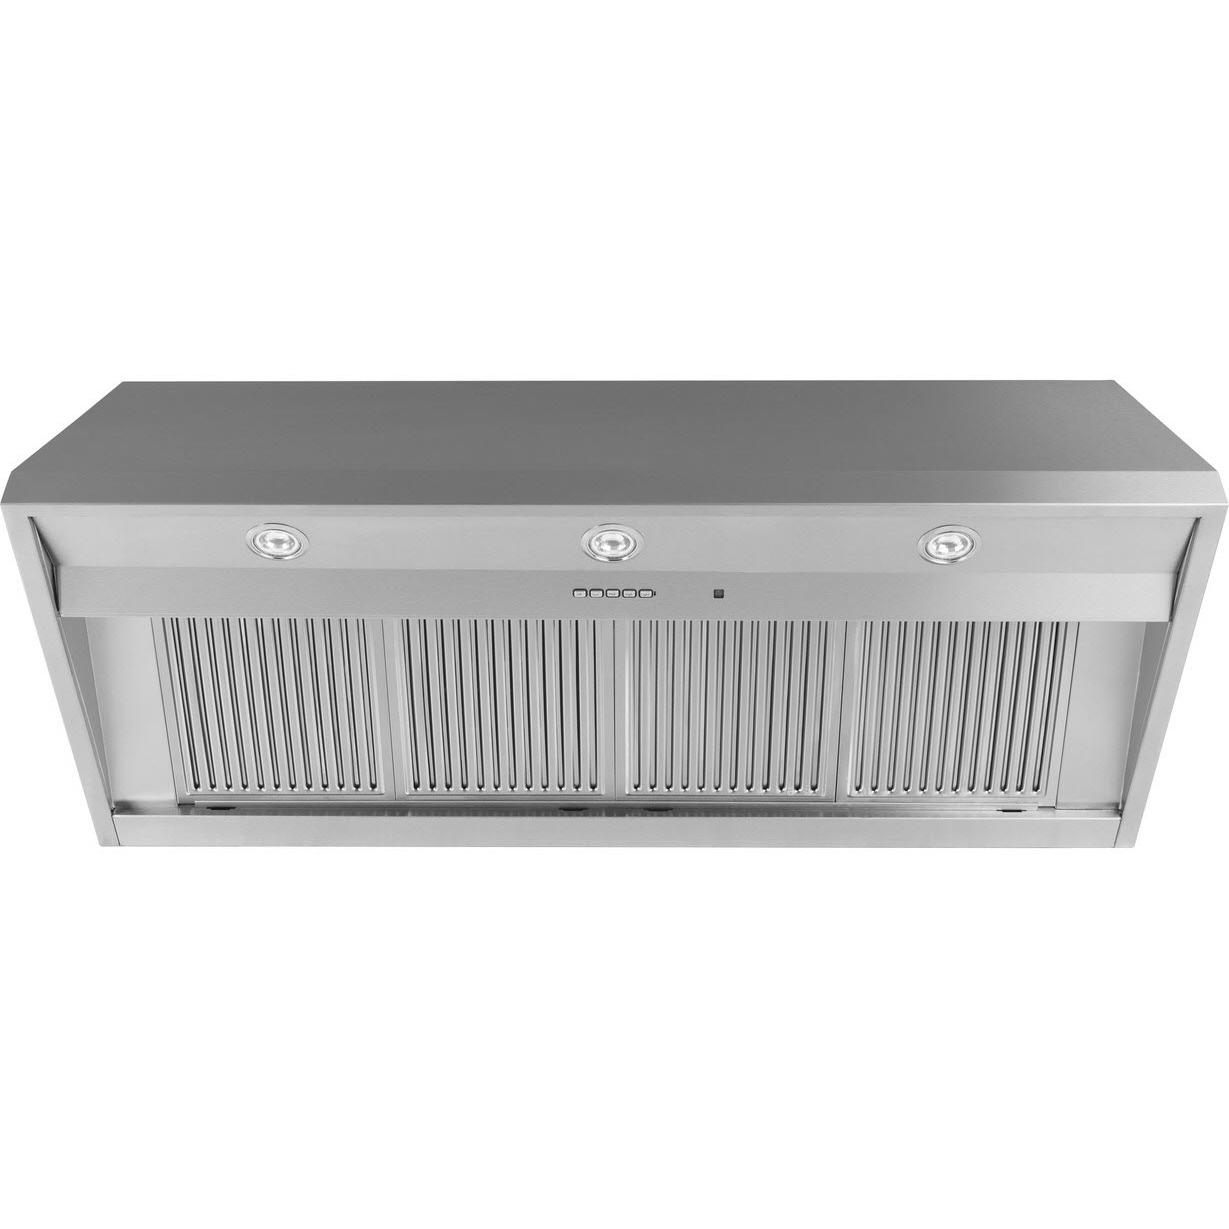 GE 48-inch Professional Series Wall Mount Range Hood with LED Lighting UVW9484SPSS